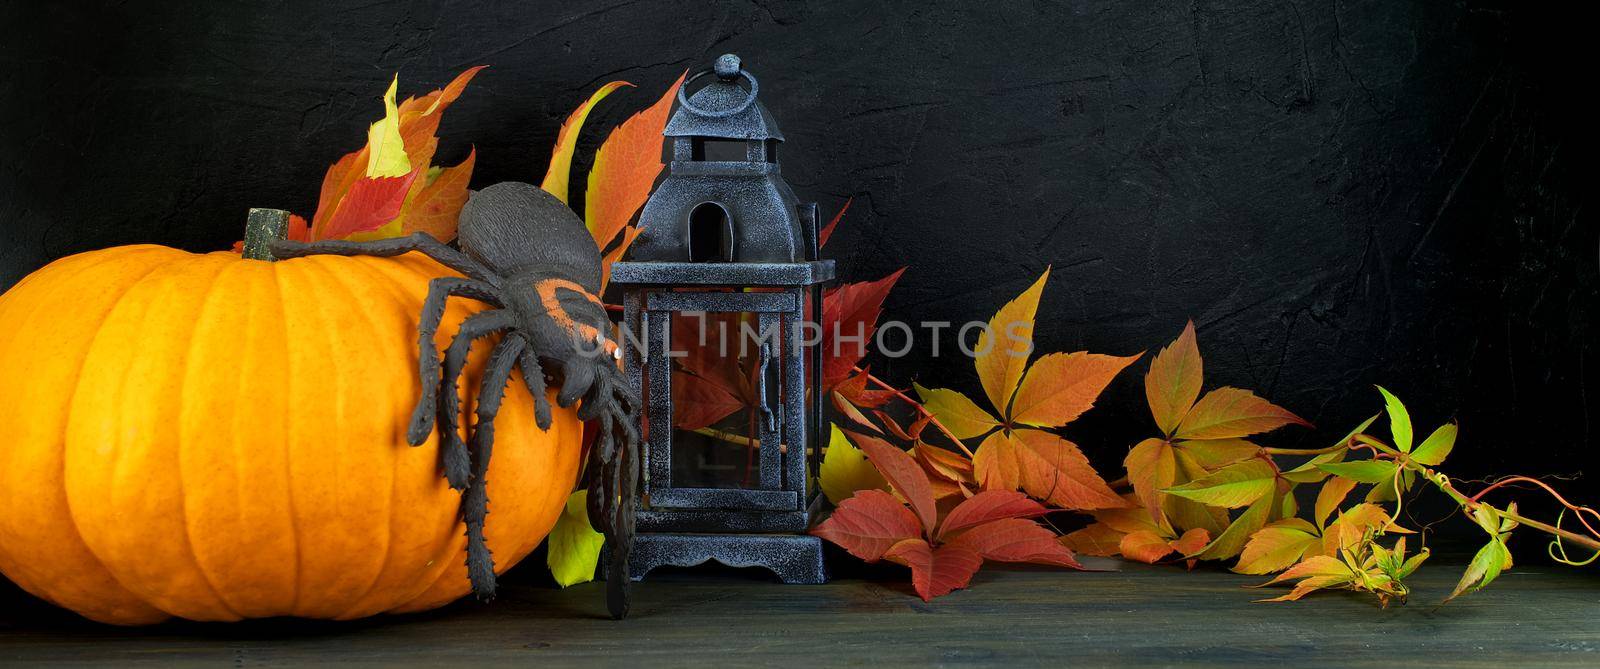 Halloween panorama with creepy spider crawling on a pumpkin and colorful autumn or fall leaves surrounding a lantern over a black background with copyspace